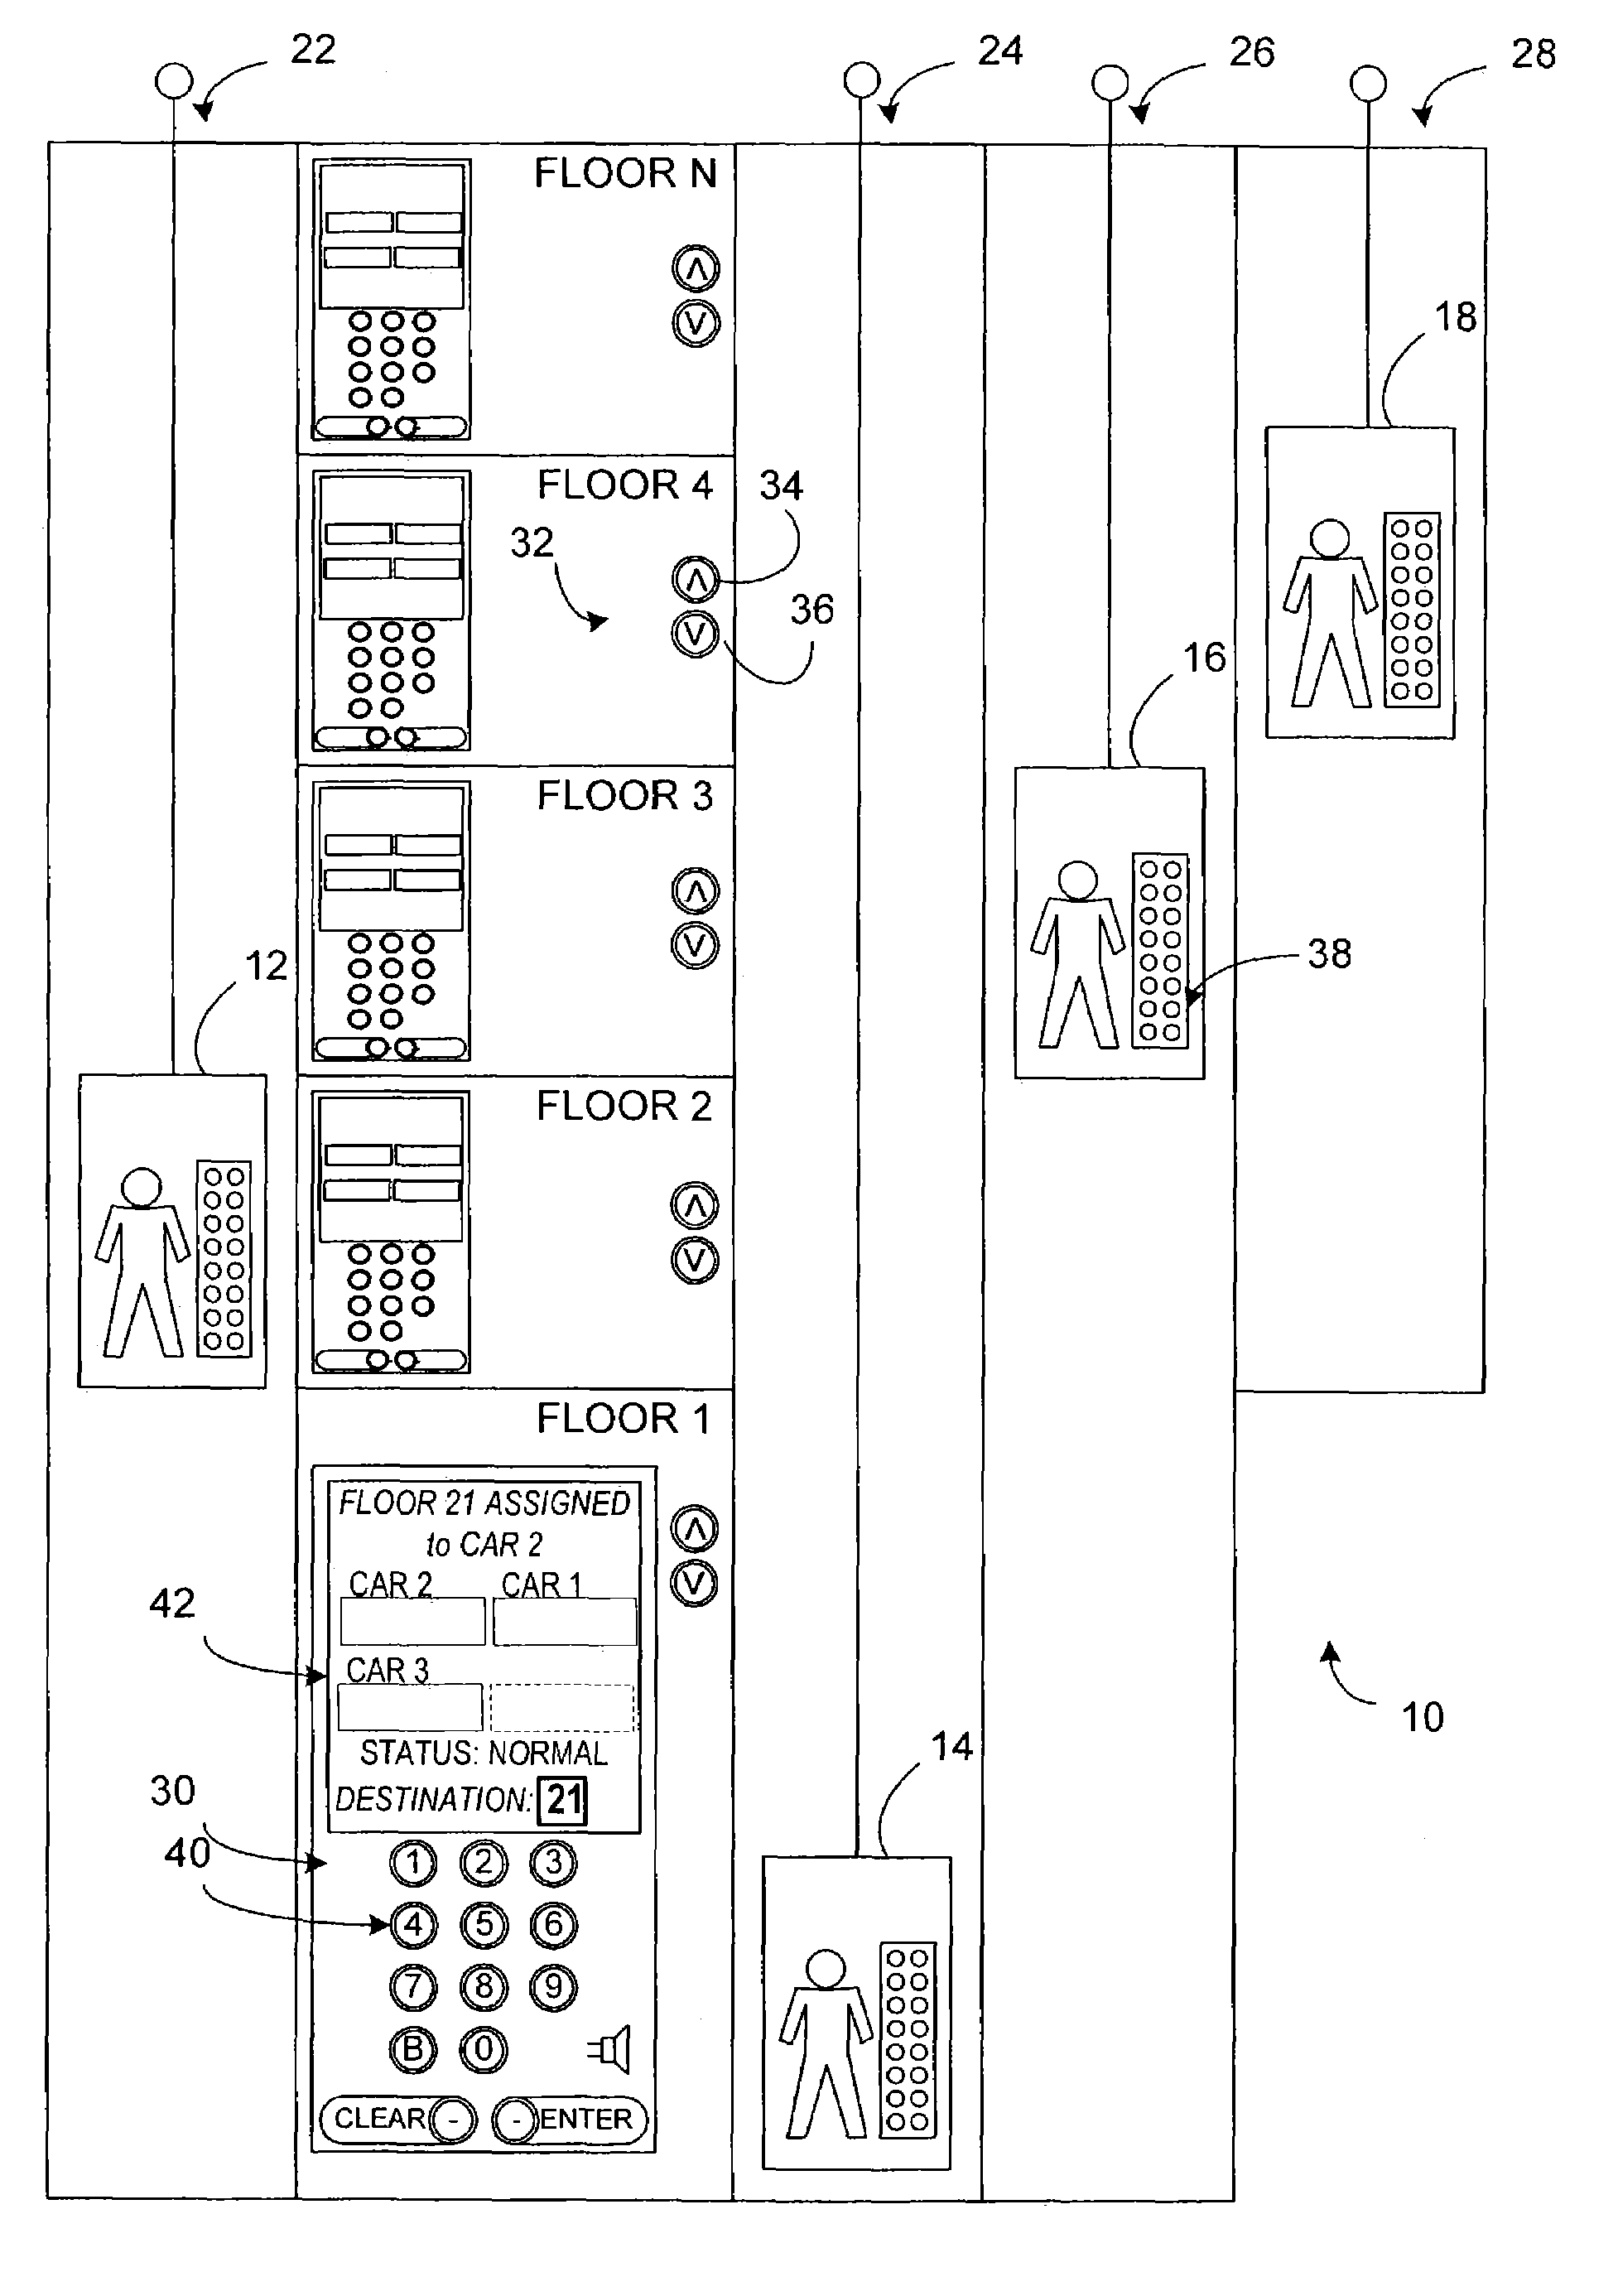 Elevator destination protocol control with flexible user interface